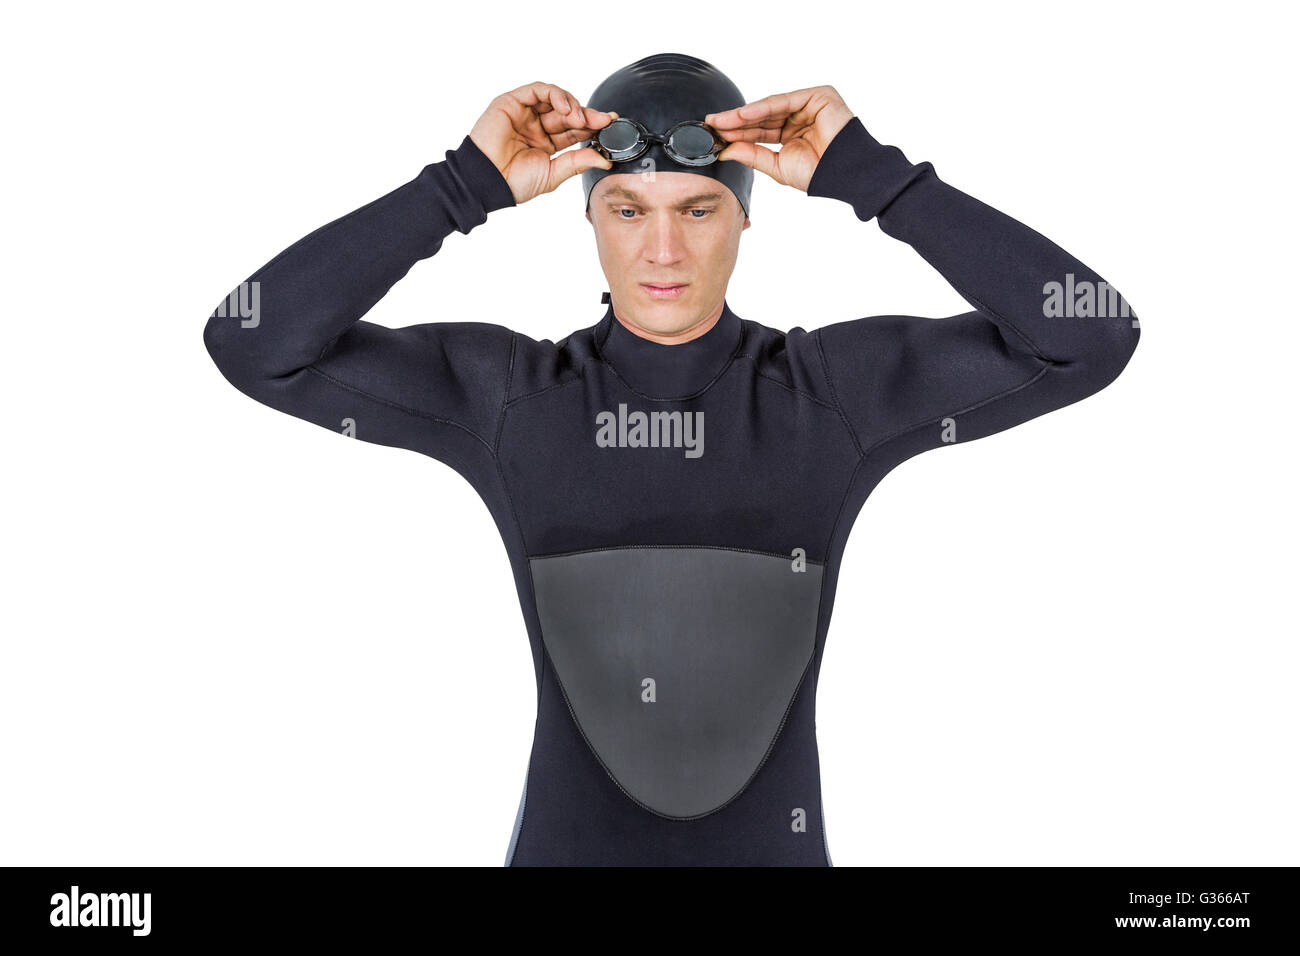 Swimmer in wetsuit wearing swimming goggles Stock Photo